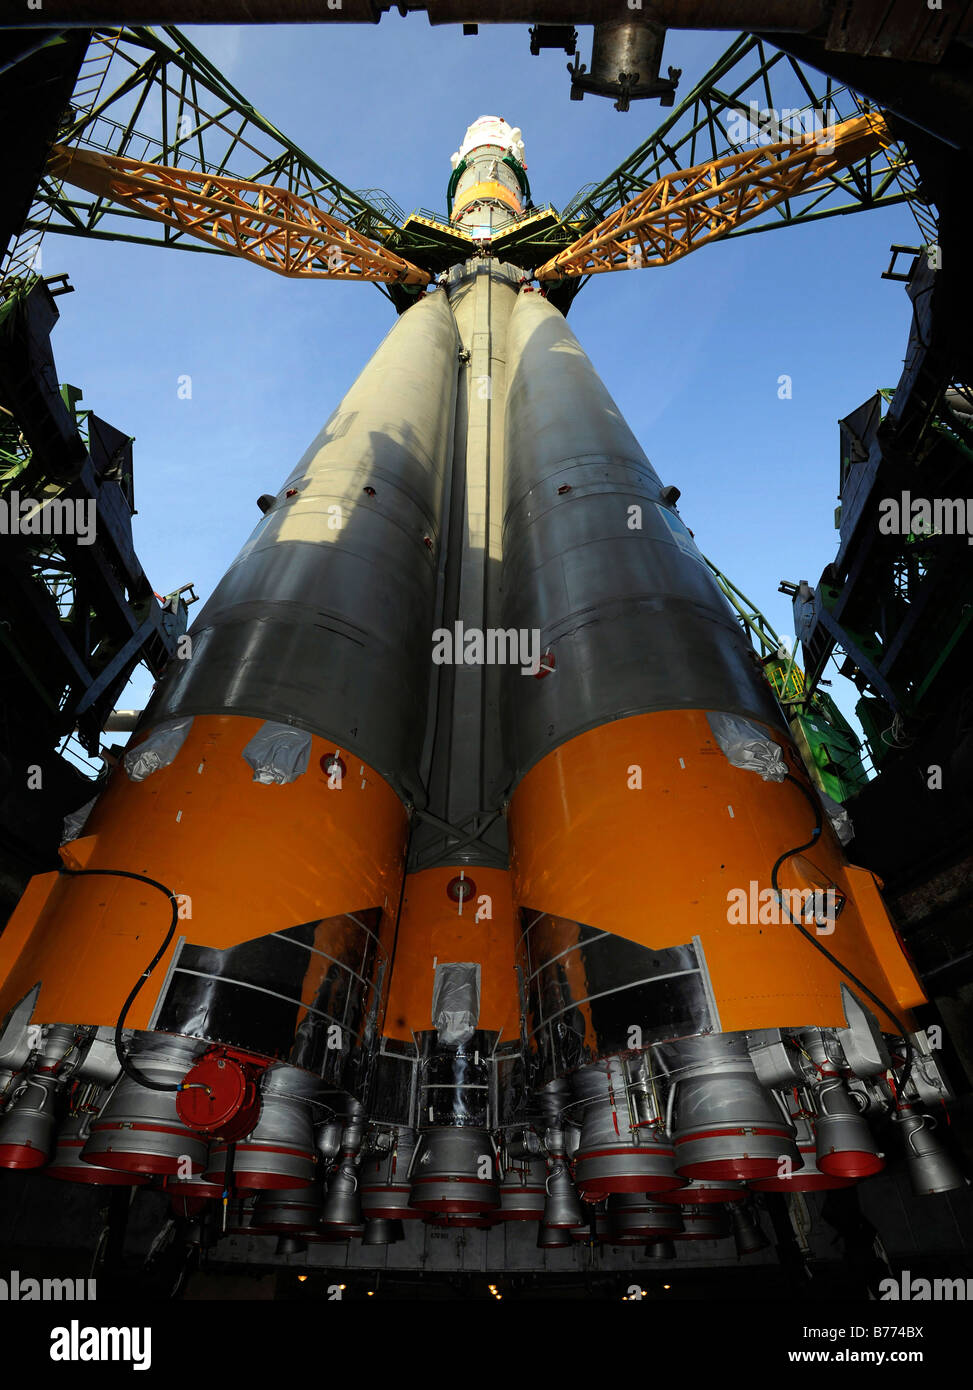 The Soyuz TMA-13 spacecraft arrives at the launch pad. Stock Photo